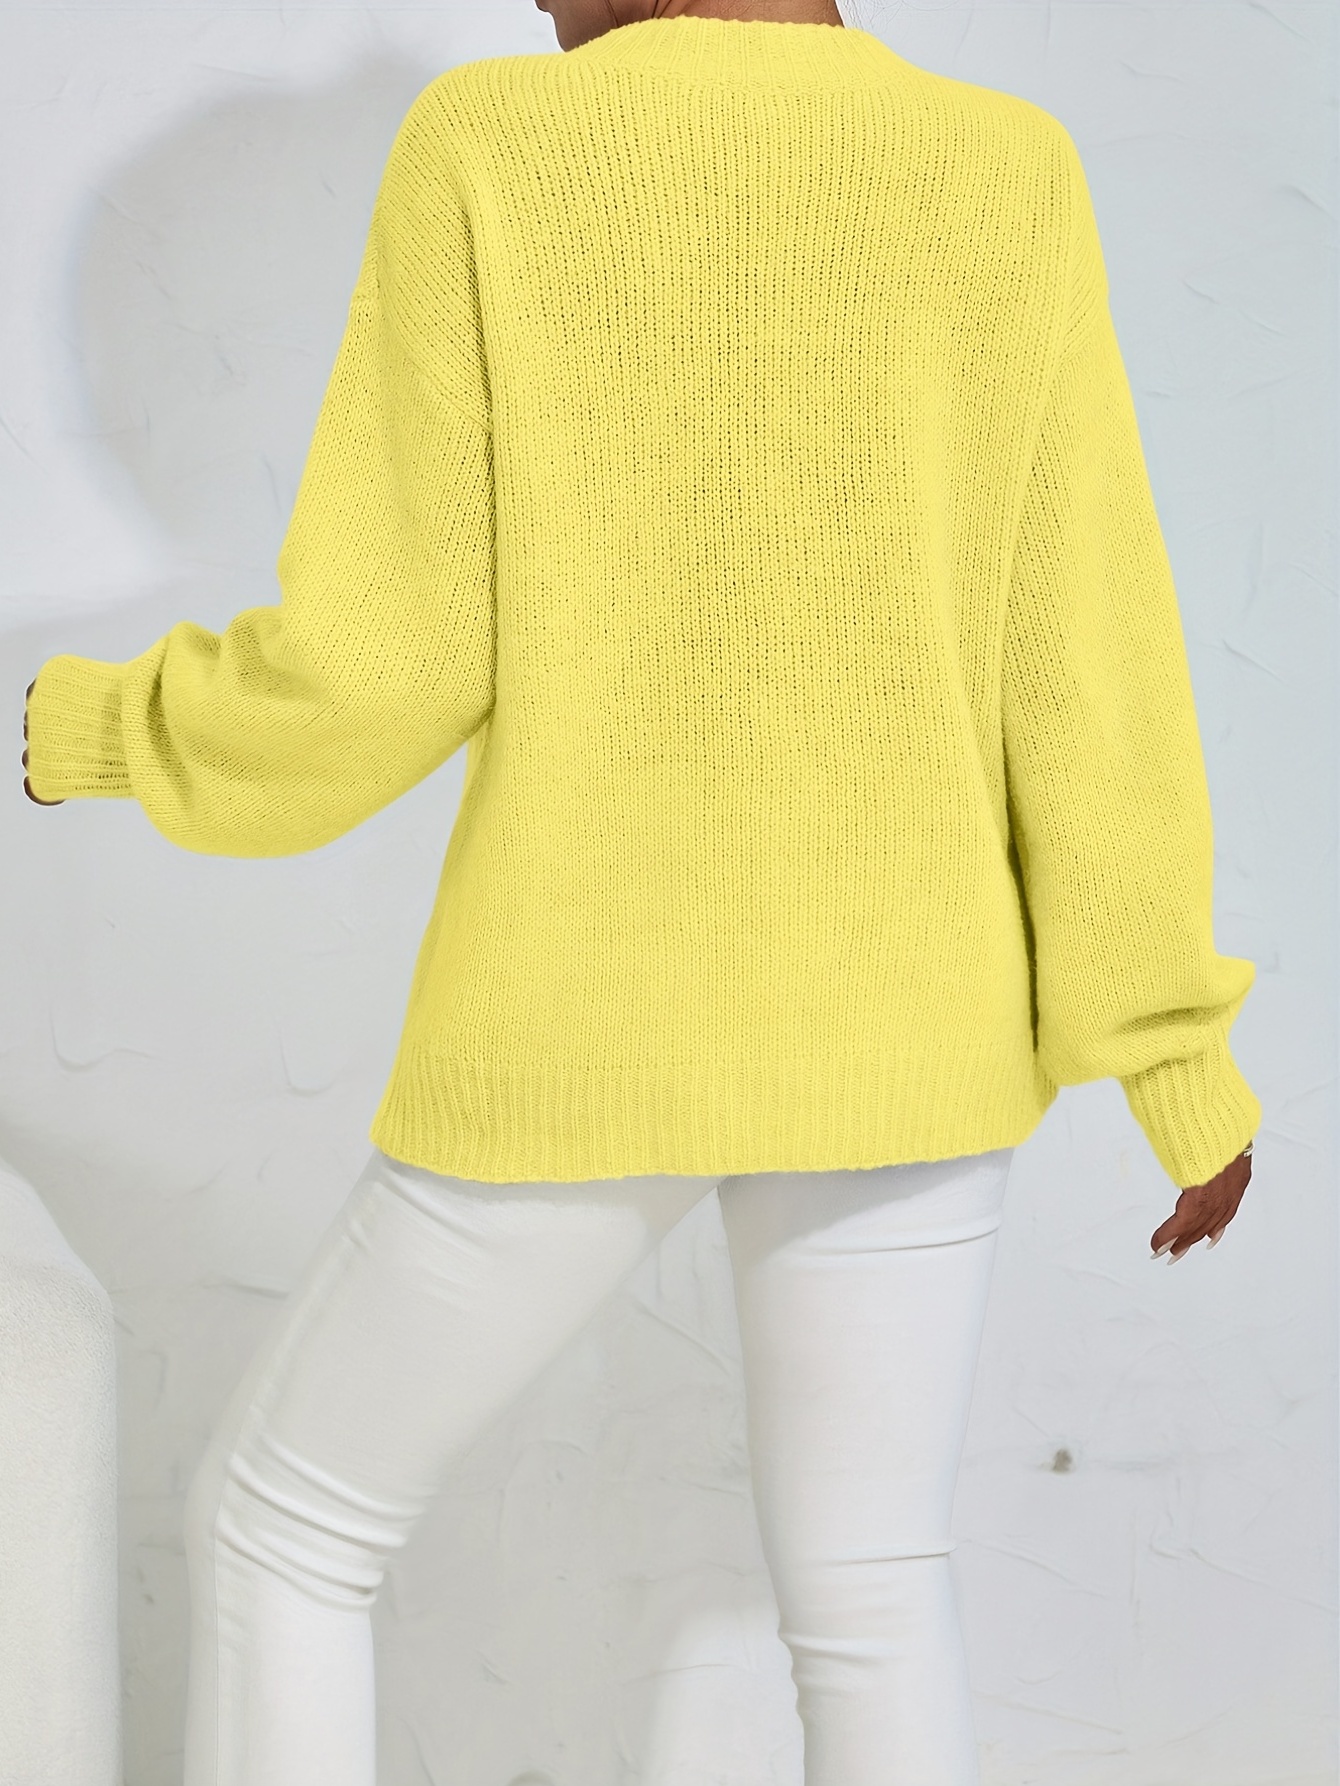 JDEFEG Womens Sweaters Lightweight Women Casual Loose Solid Color Long  Sleeve Fashion V Neck Pullover Sweater Small Women Sweater Yellow Xl 